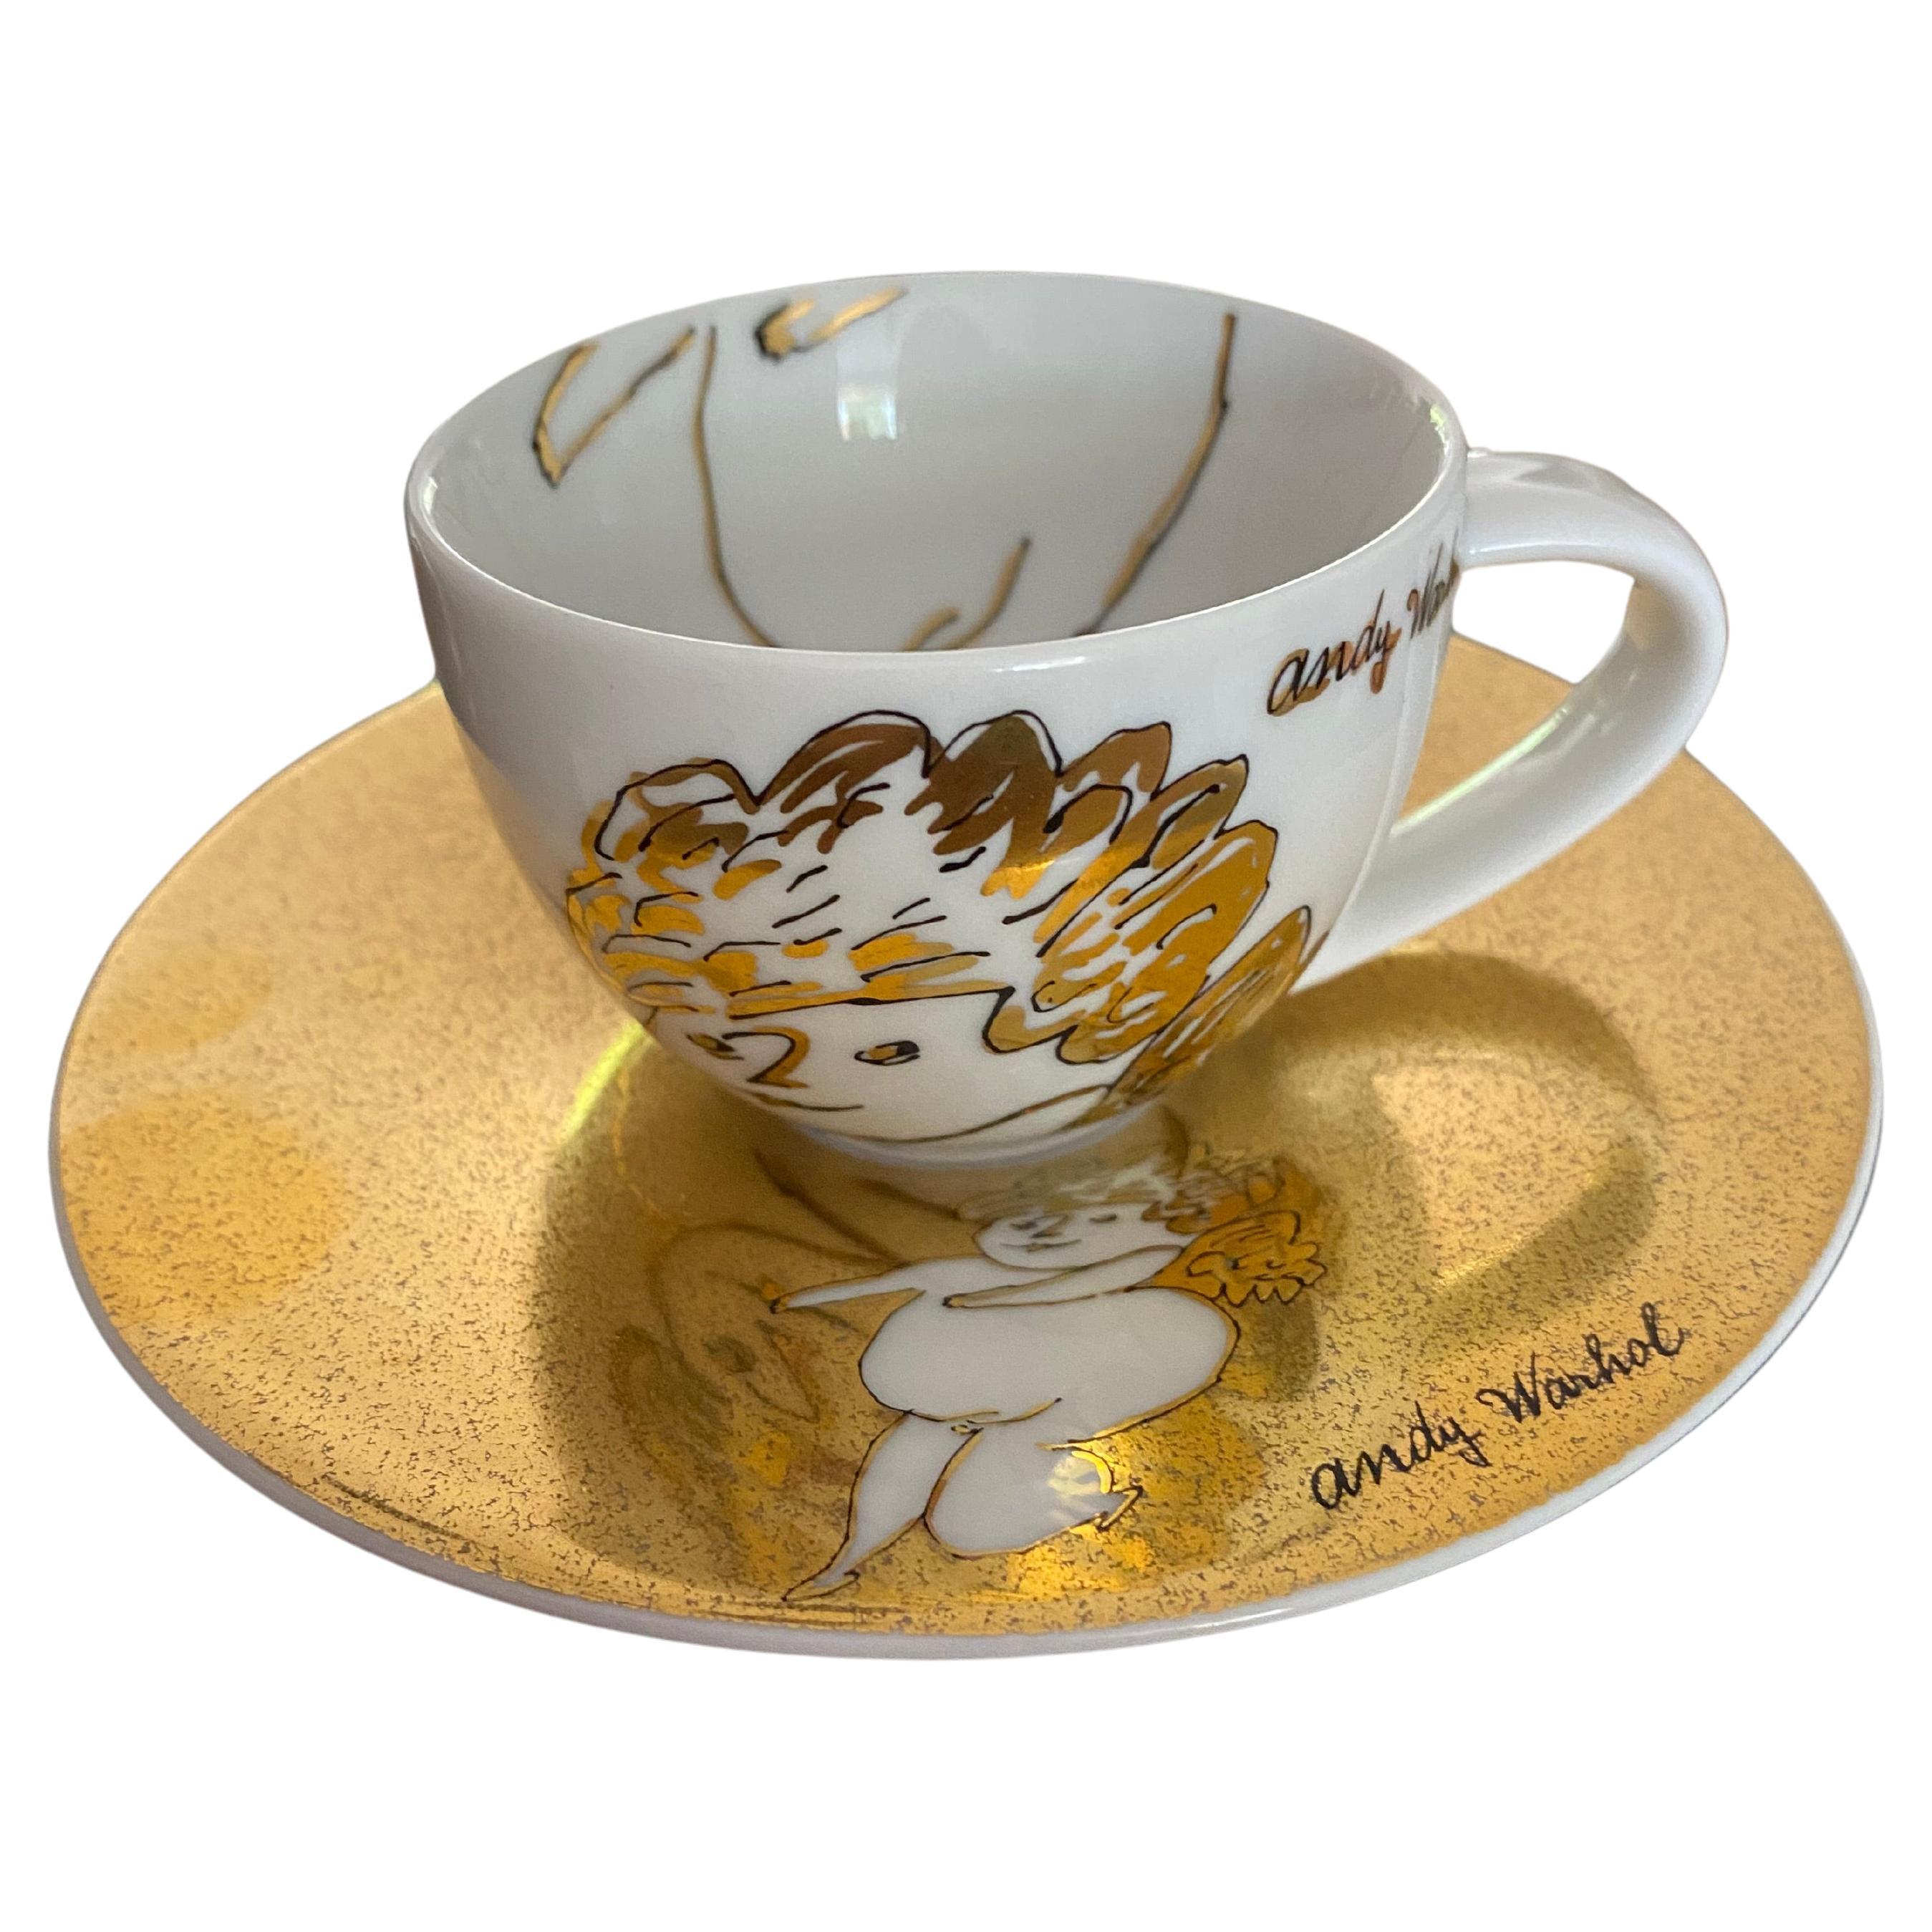 Rosenthal Andy Warhol "Golden Angels" NEW Espresso Cup and Saucer